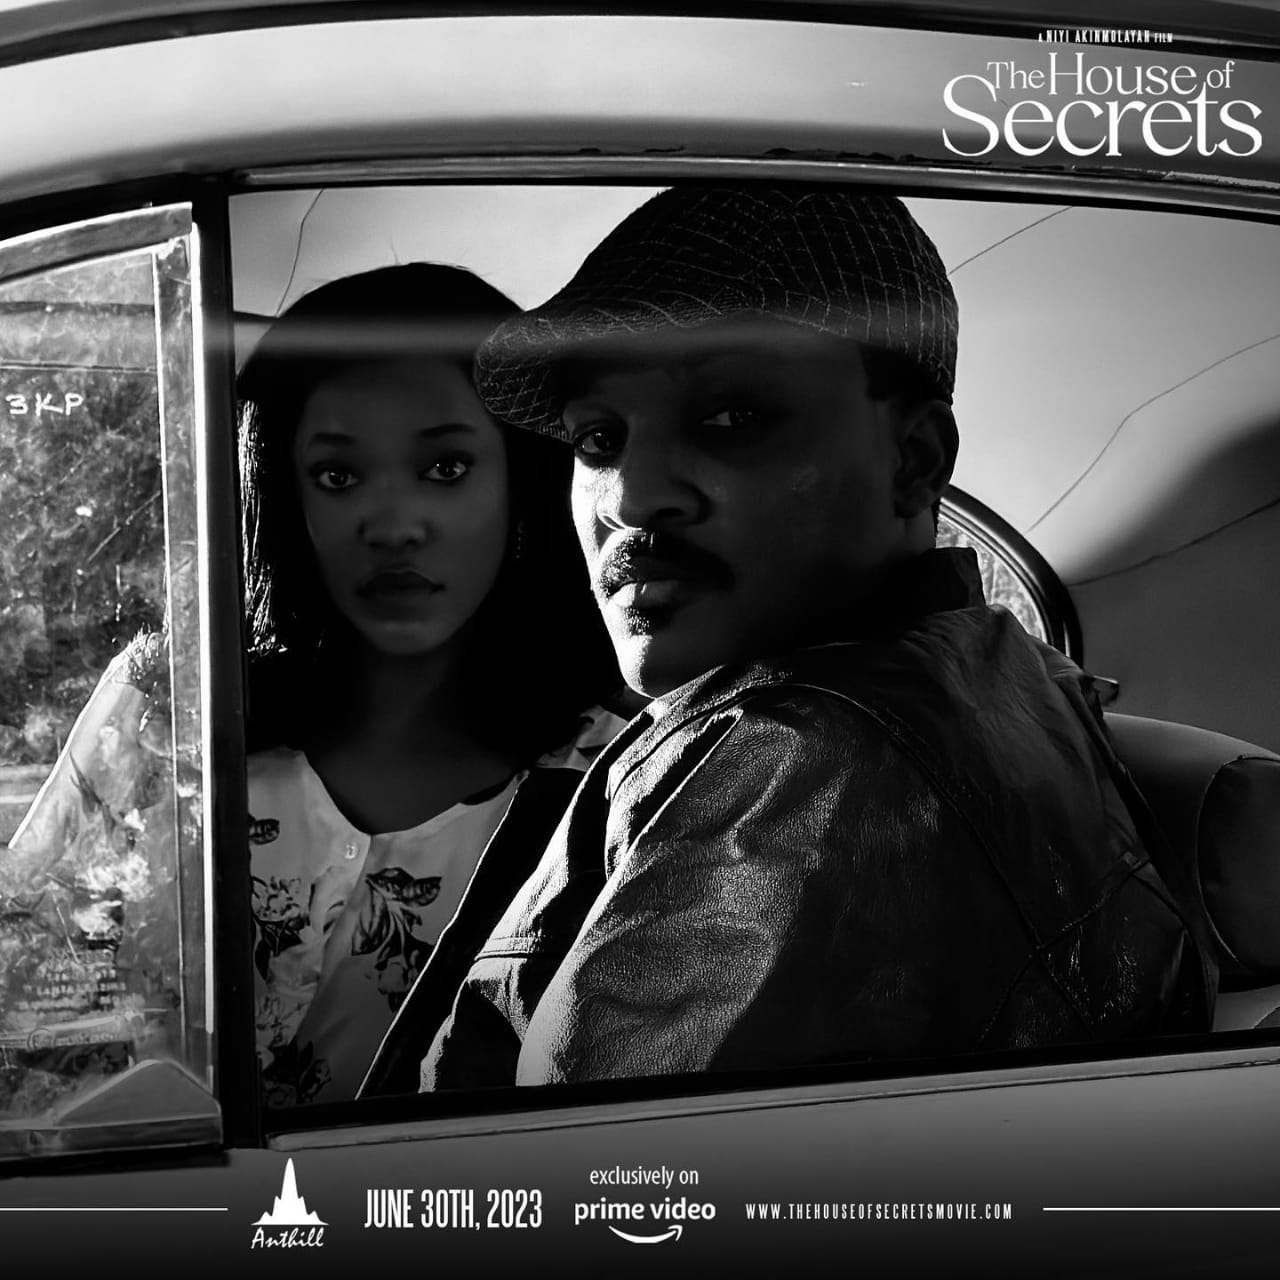 WhatsApp Image 2023 07 04 at 6.06.14 AM - The House of Secrets - A N140 Million Film